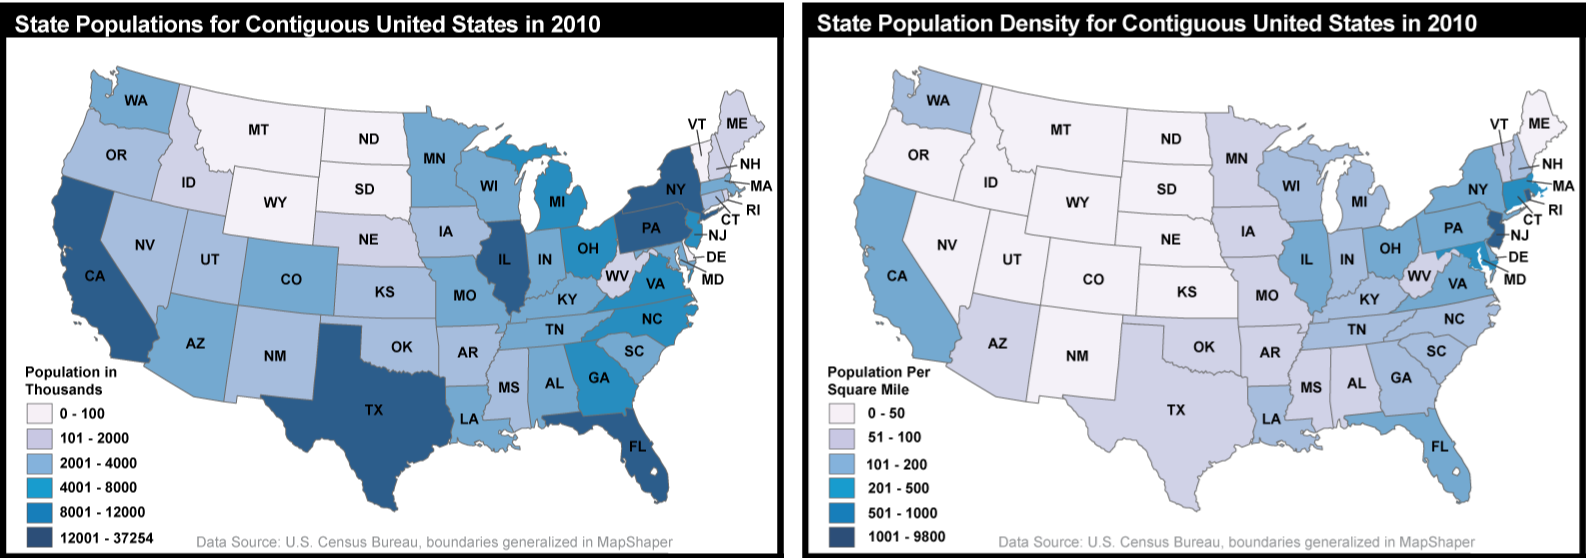 Total population count by state and population density by state. General trend greater population smaller population per sq mile